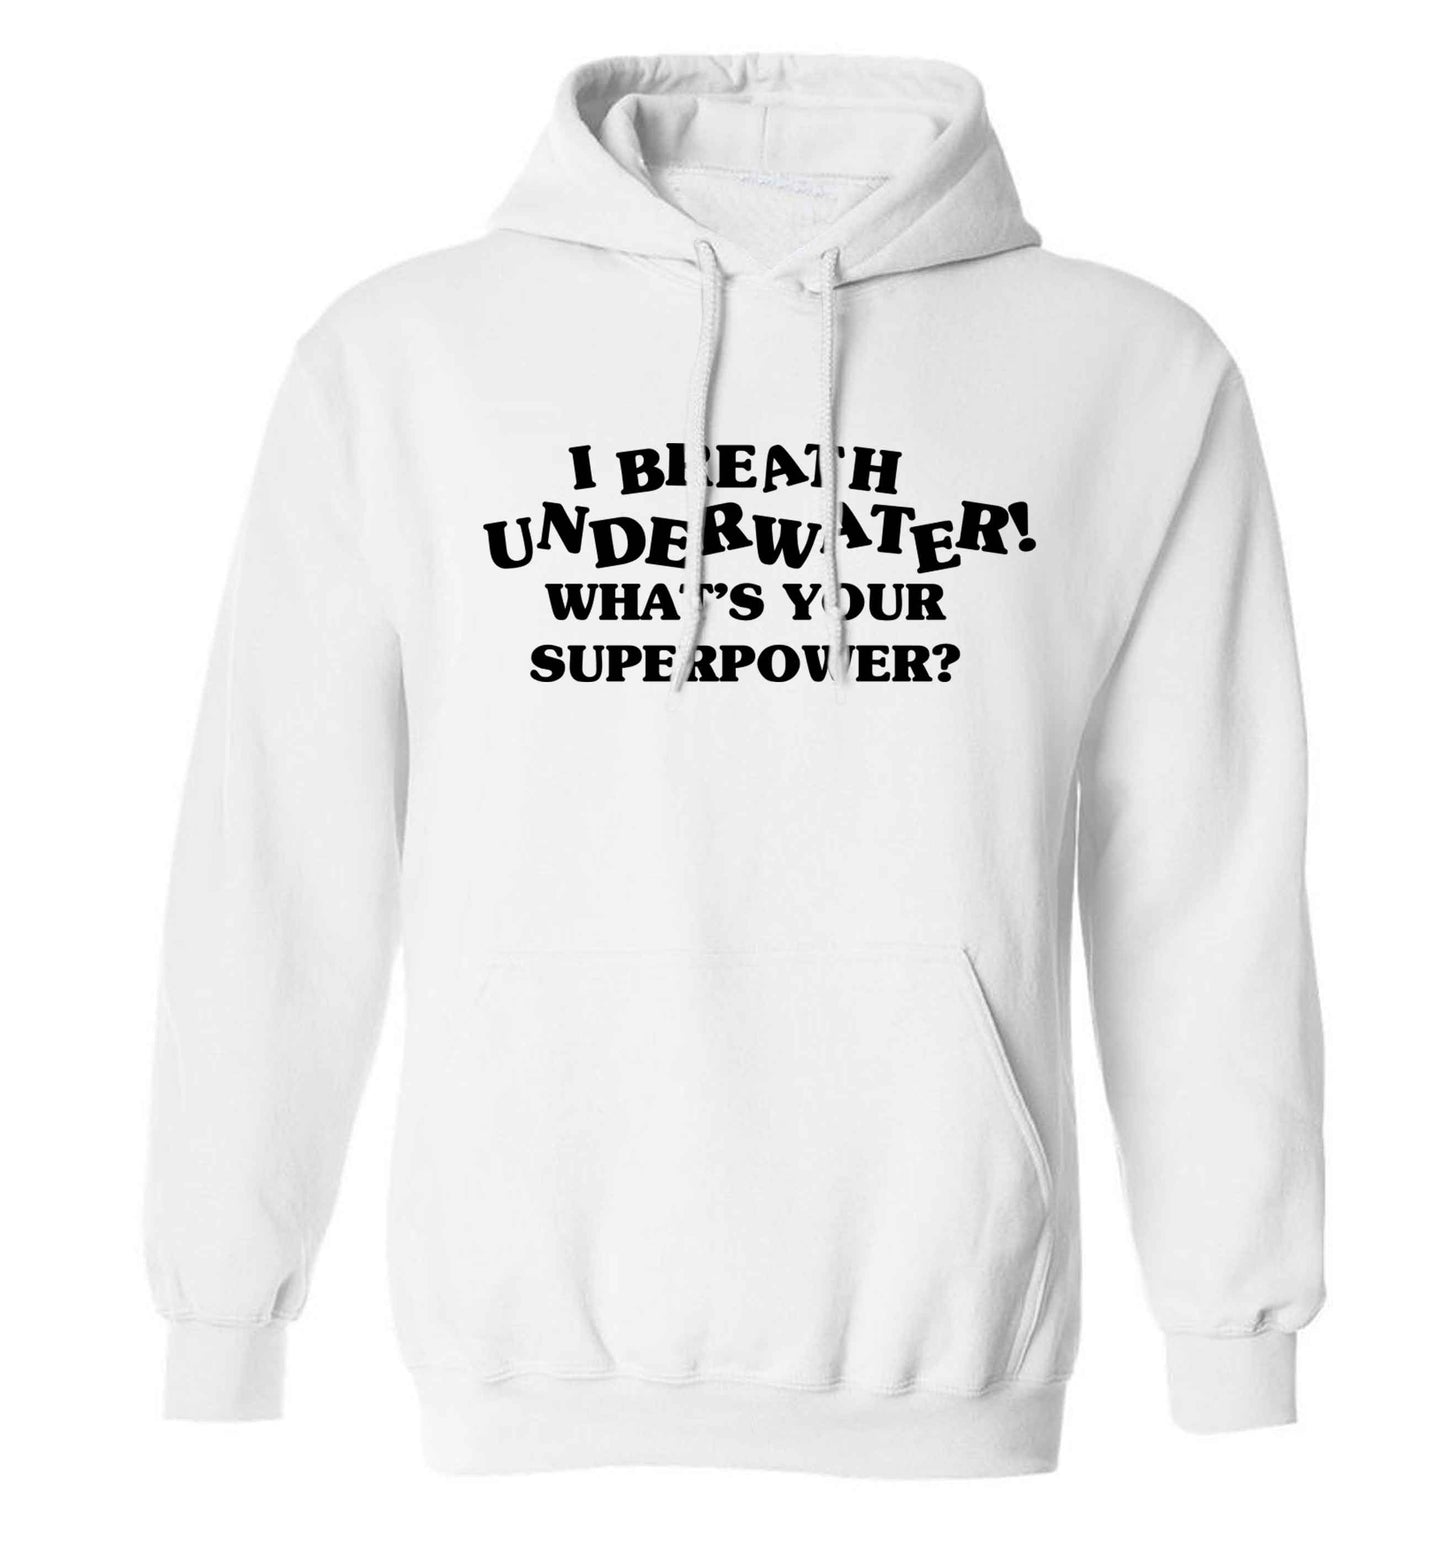 I breath underwater what's your superpower? adults unisex white hoodie 2XL